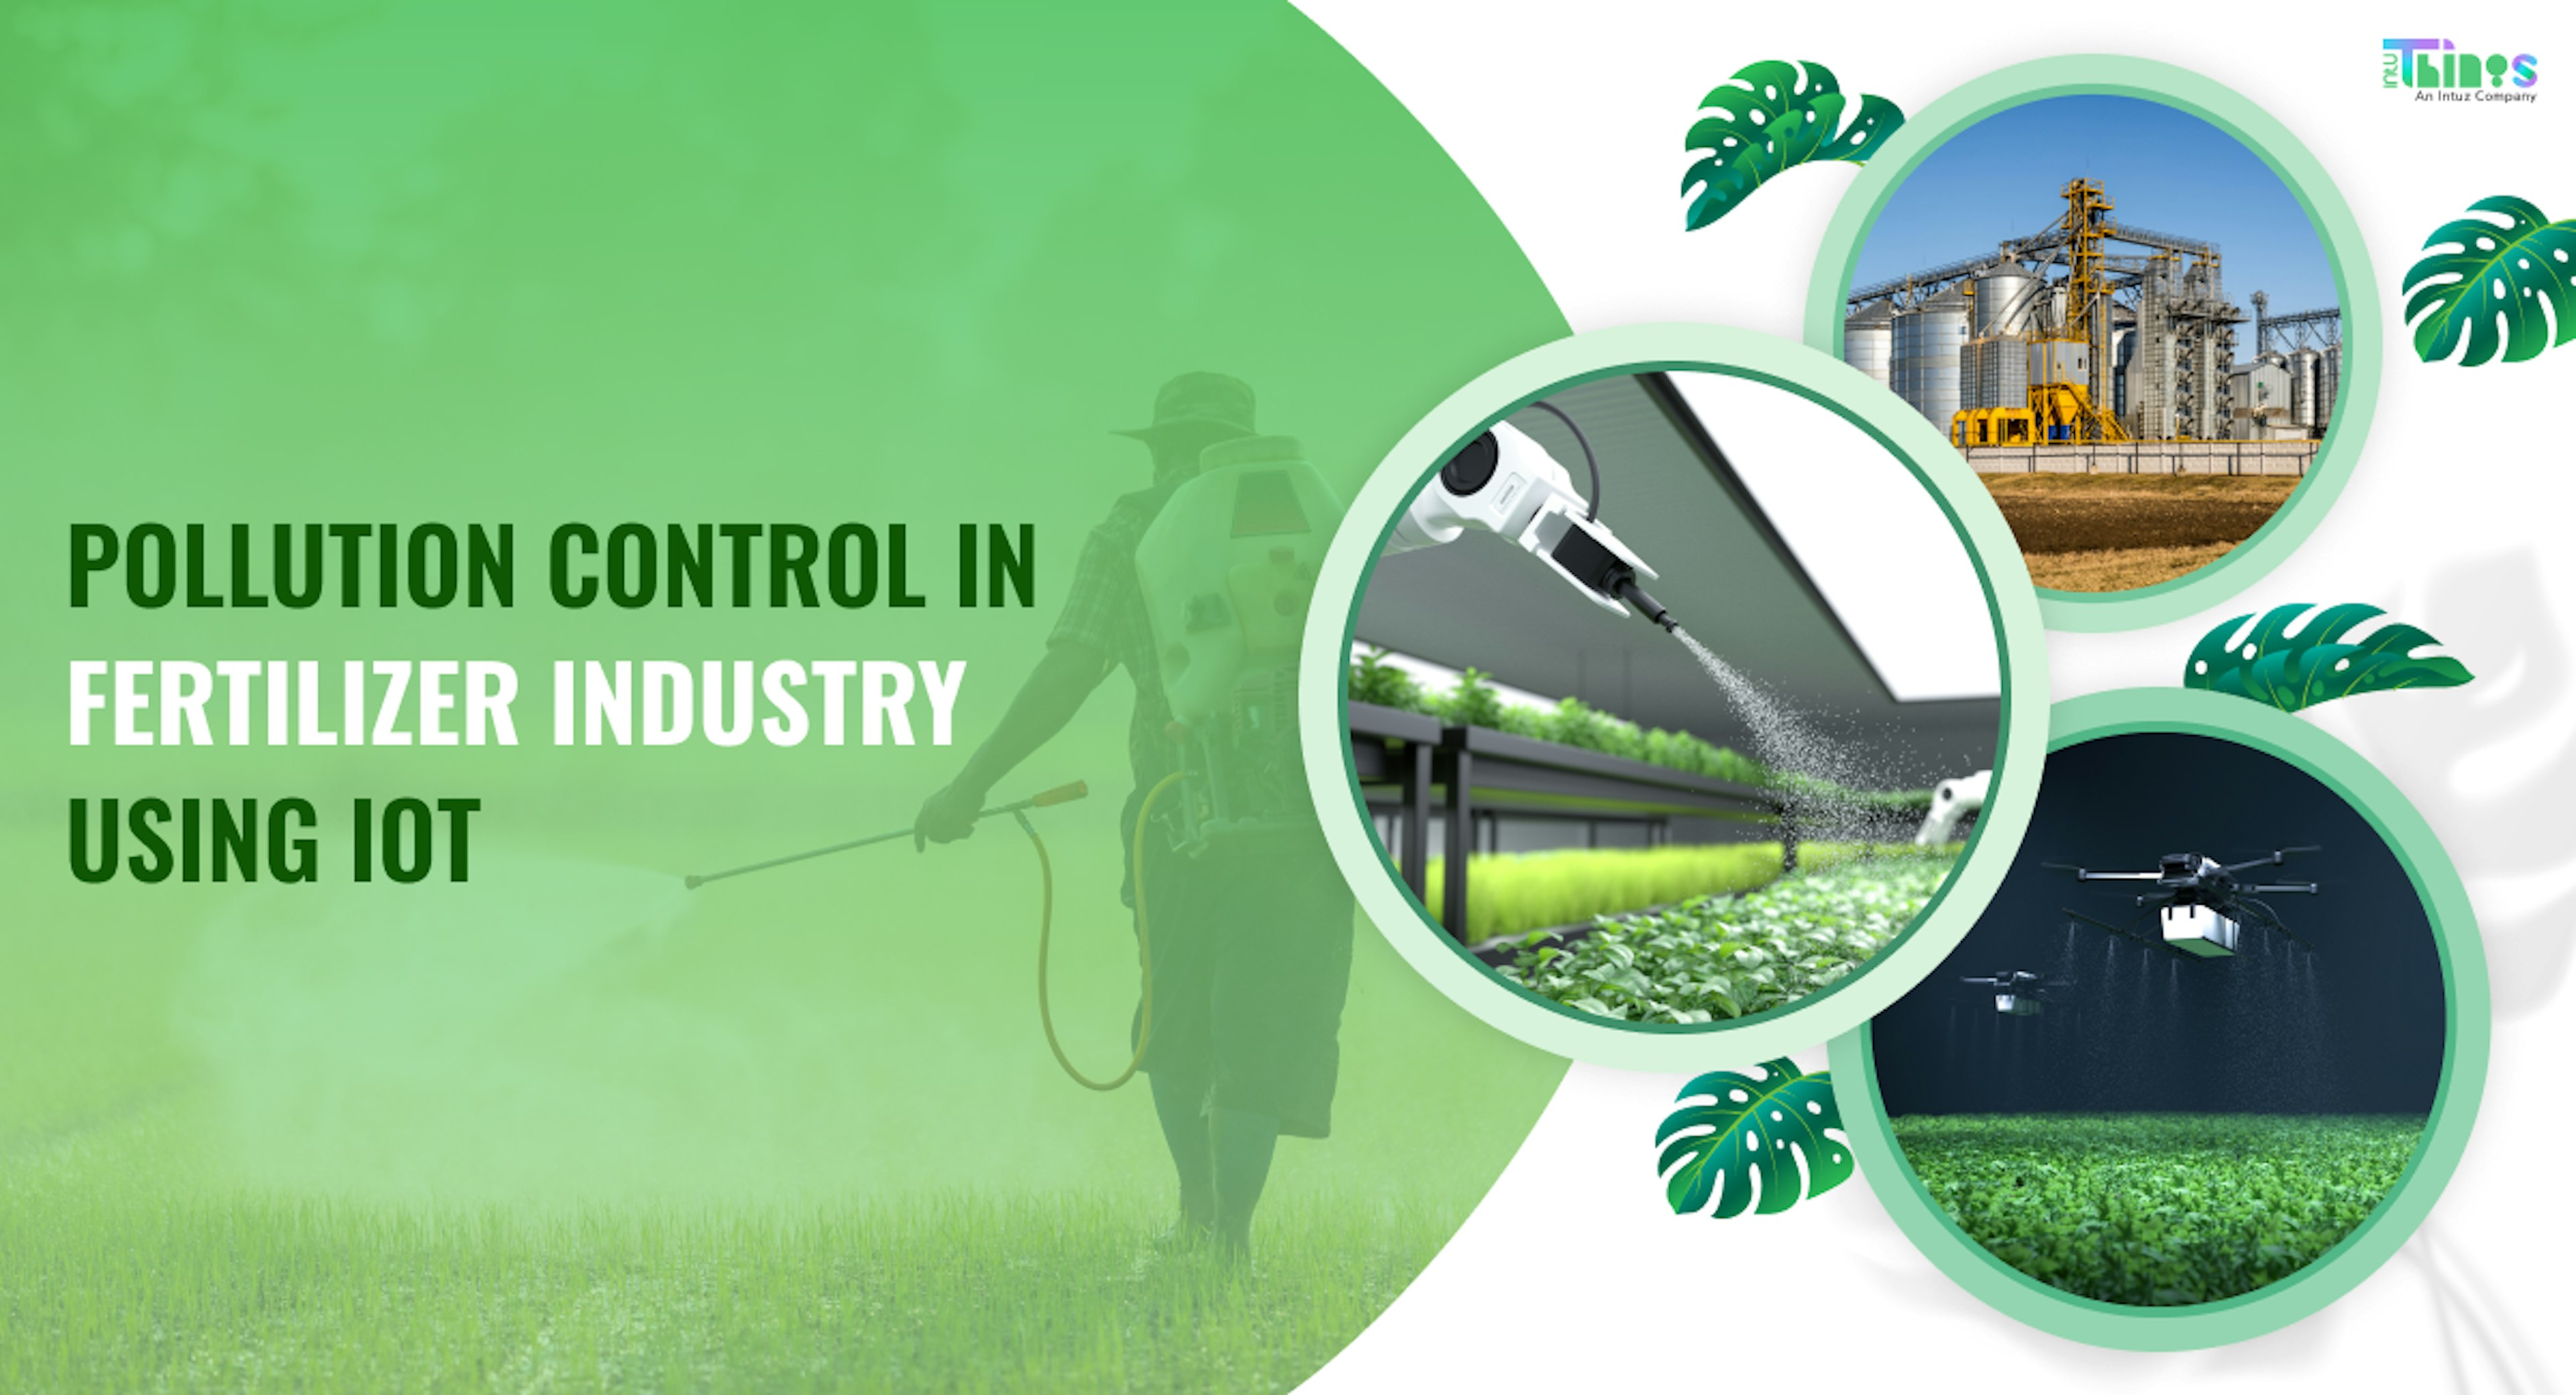 Pollution Control in Fertilizer Industry using IoT